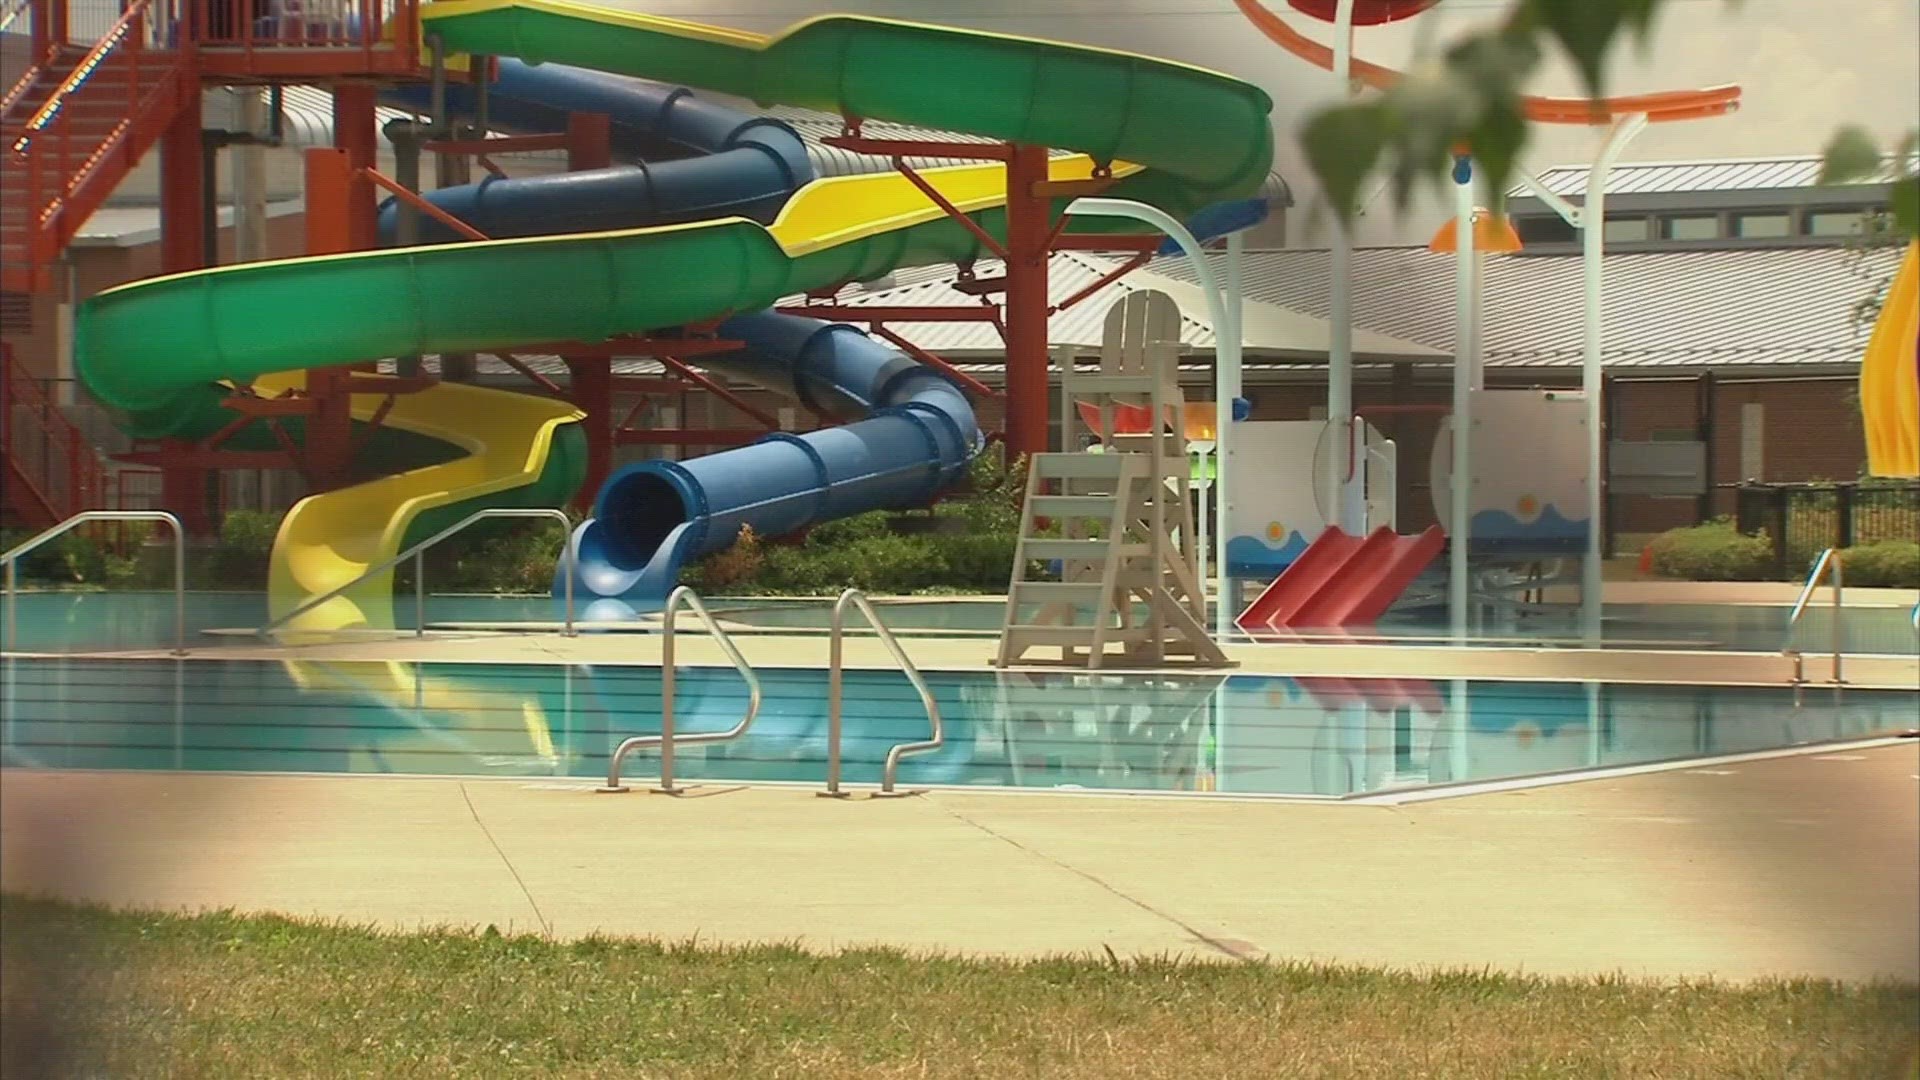 A new report released by the Columbus Recreation and Parks Department highlights the need for more pools in the city to keep up with its growing population.